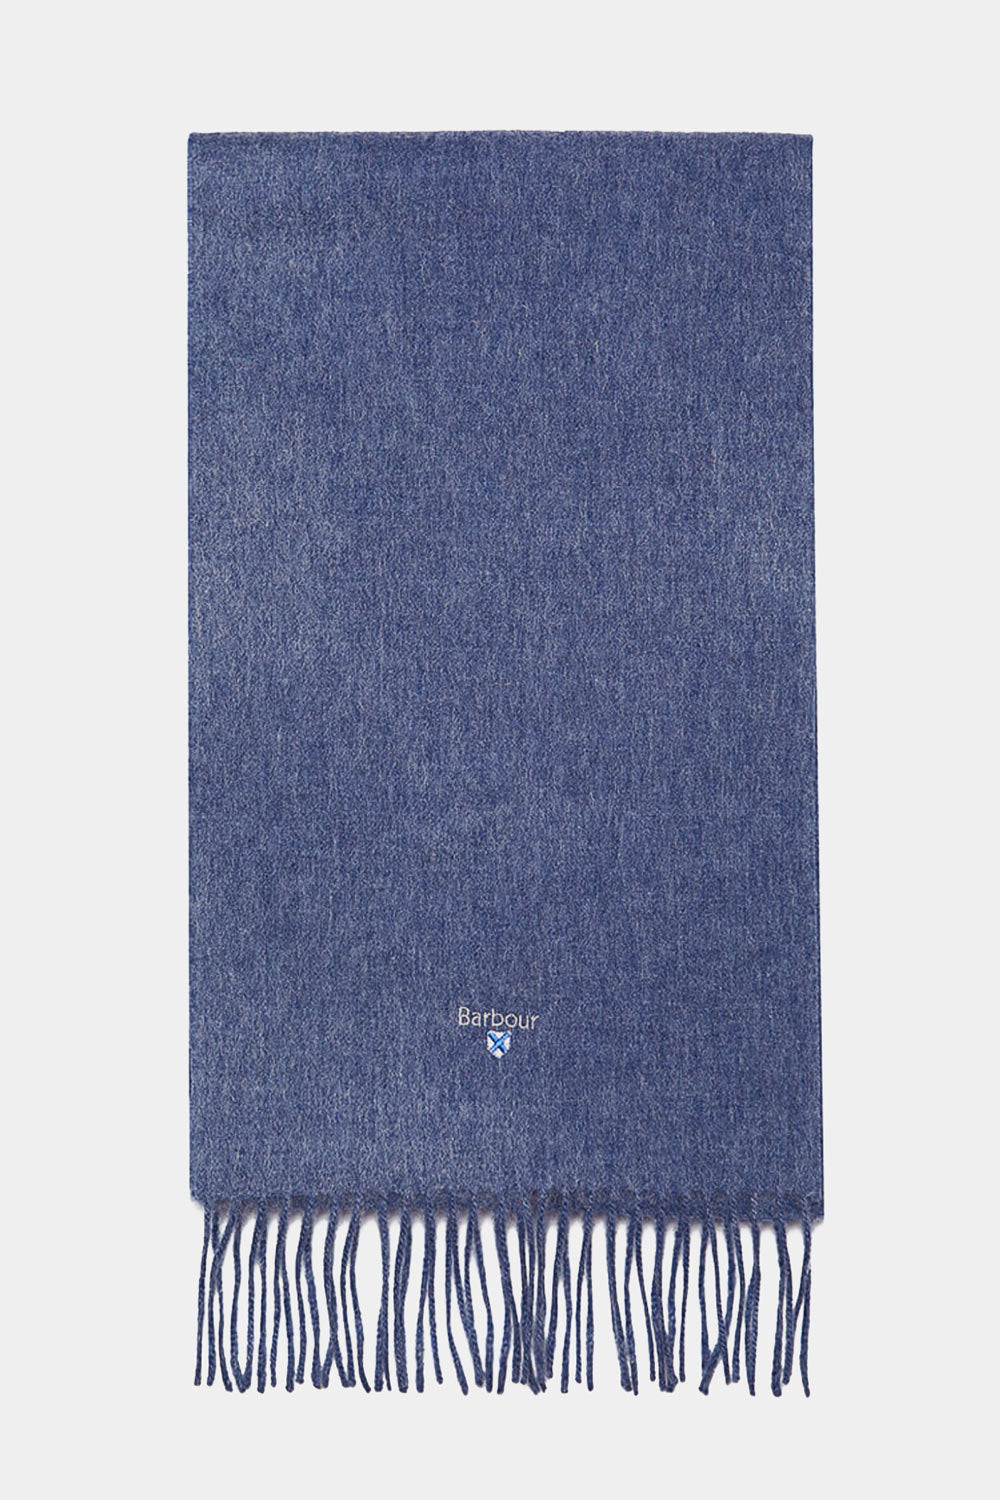 blue barbour scarf